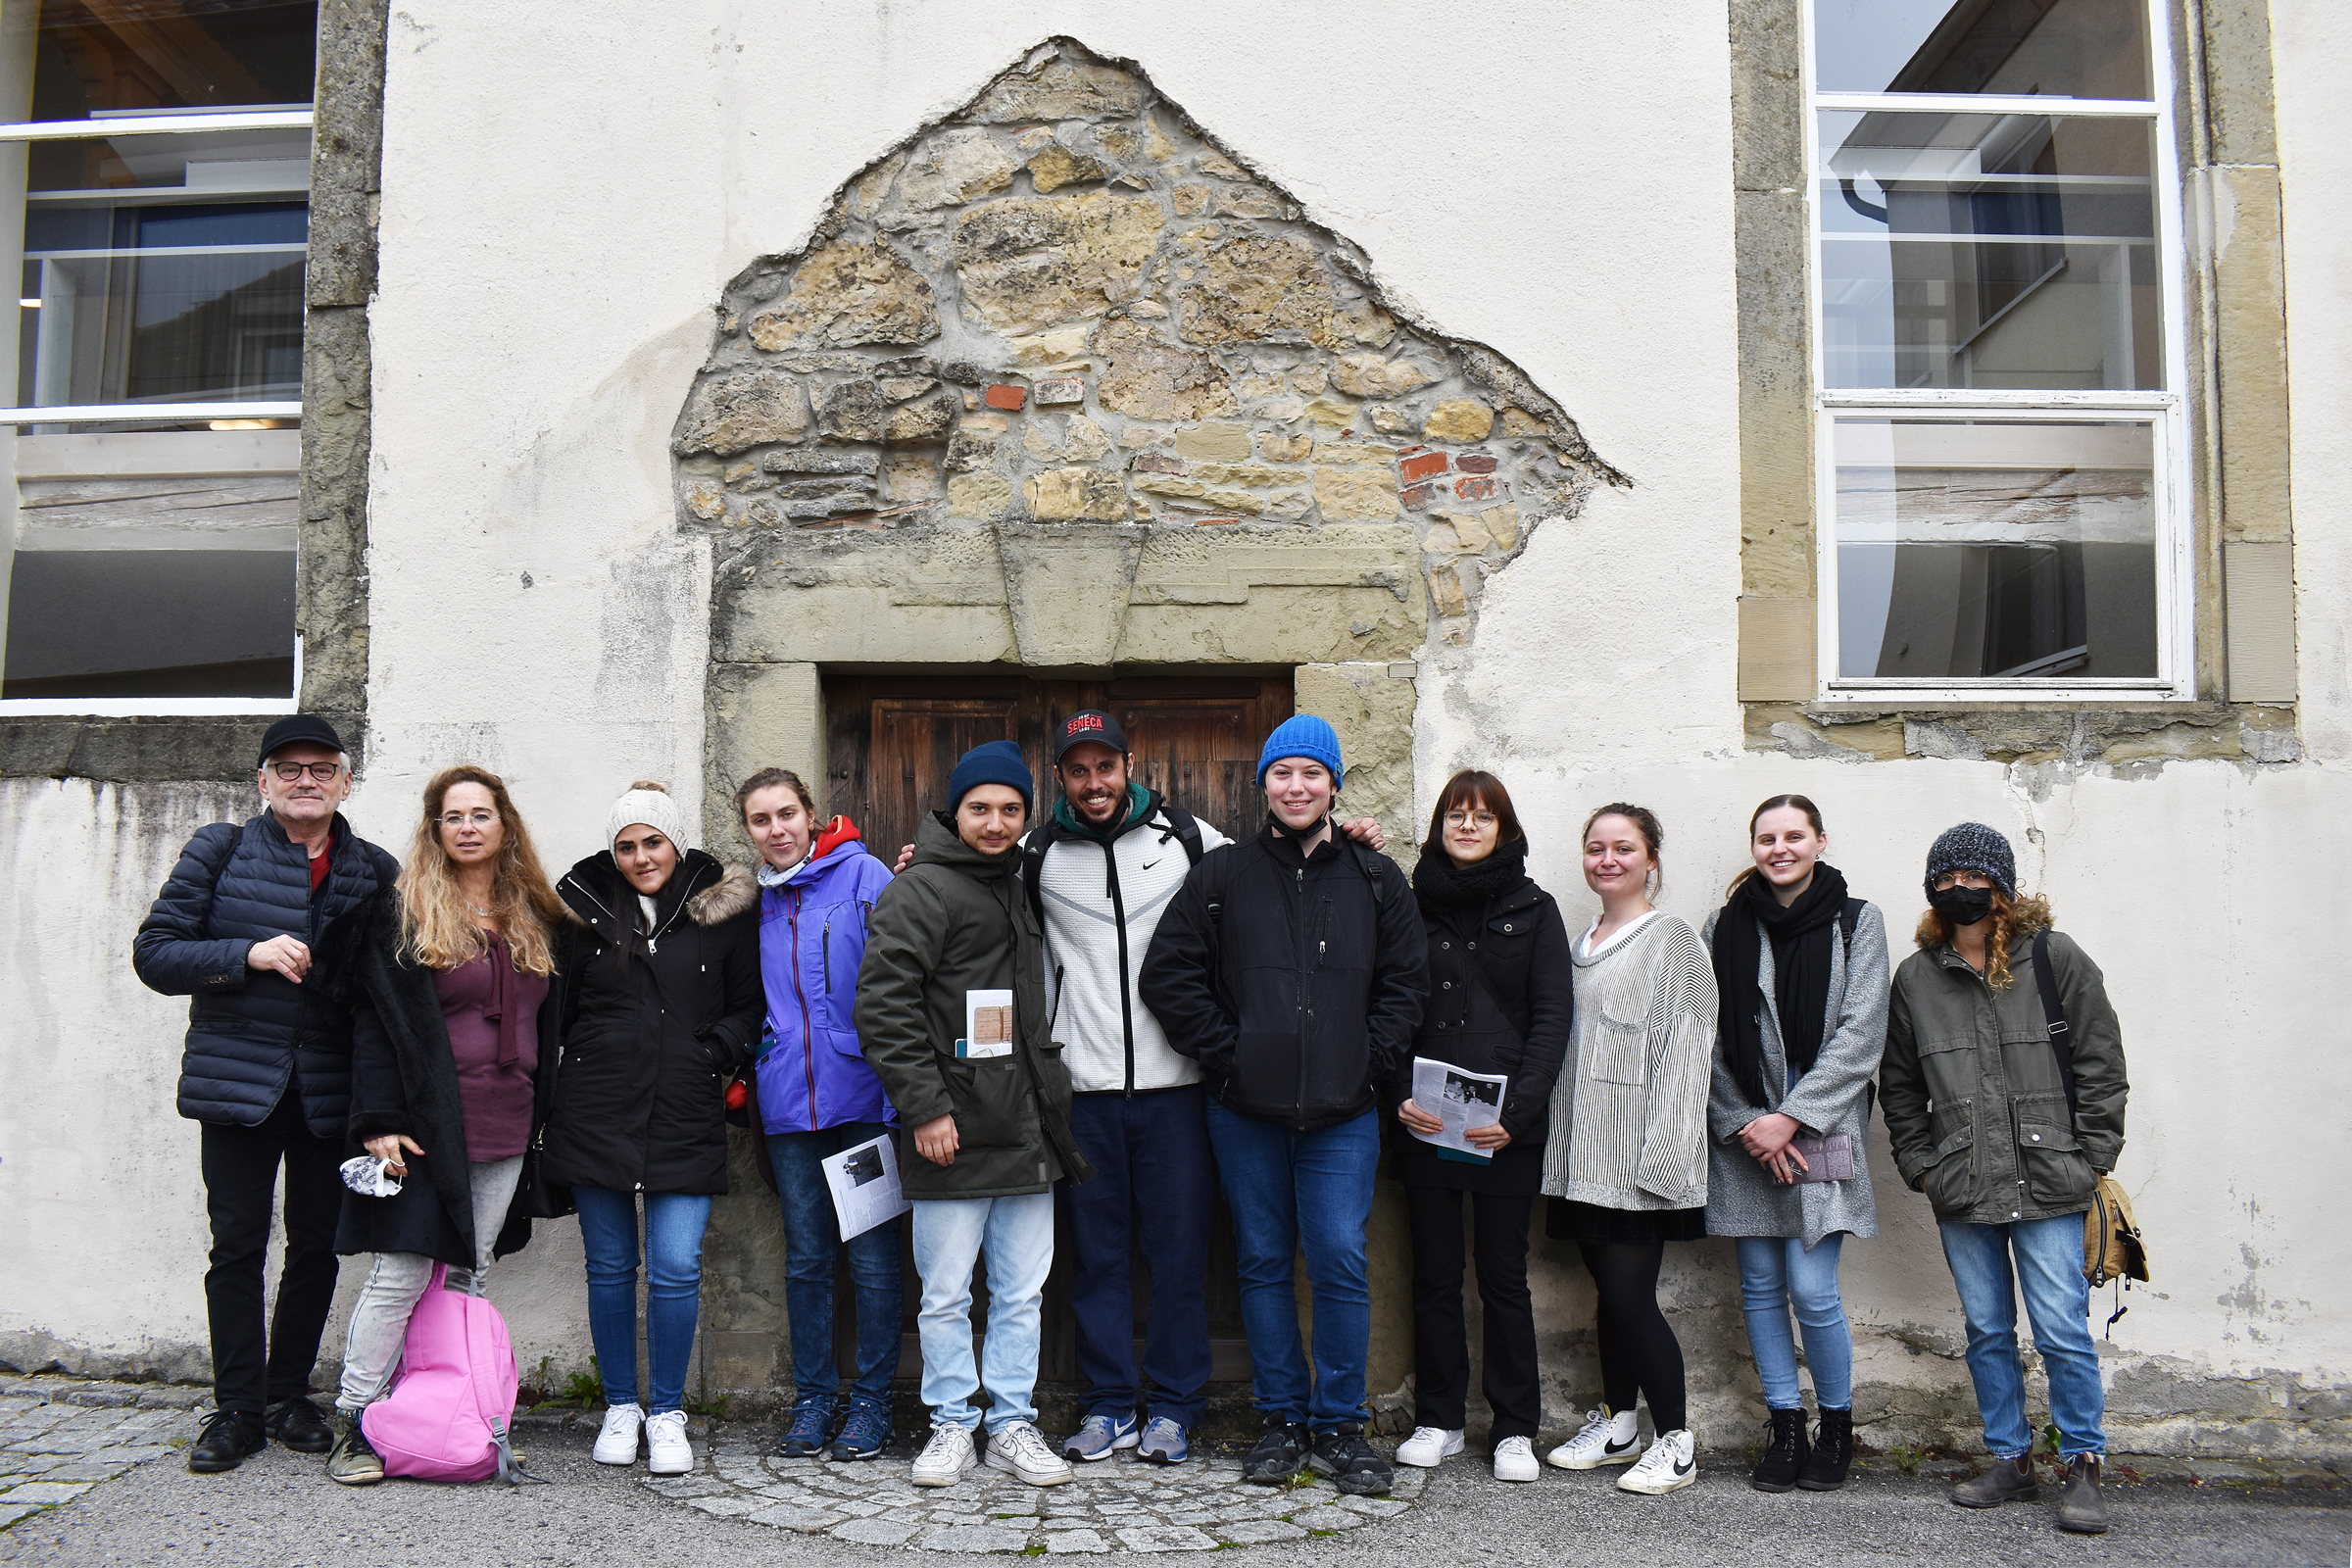 With the Israeli and German project participants, in front of the former synagogue in Baisingen.